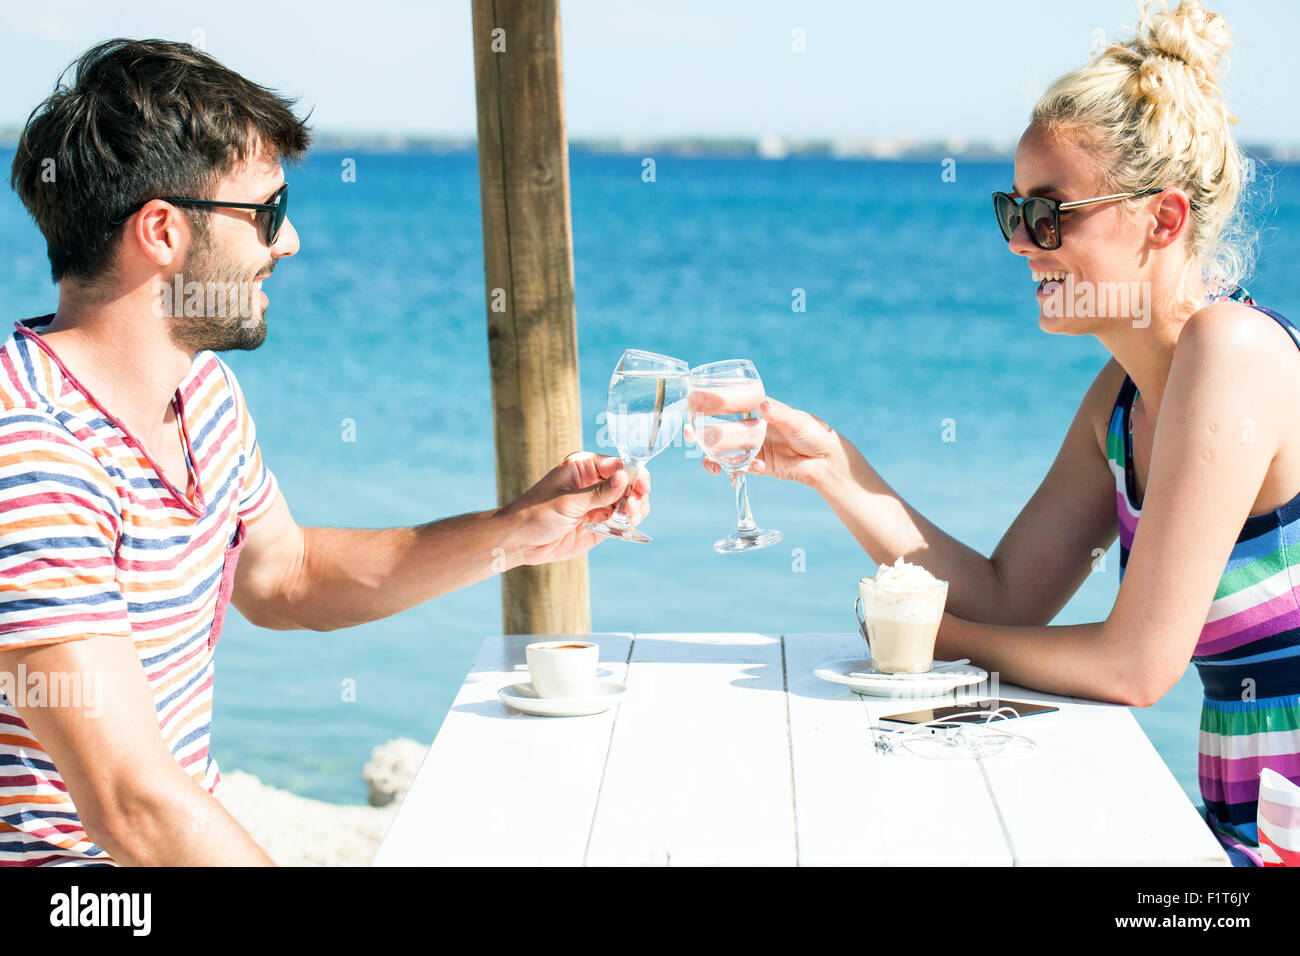 Young couple sitting at table in beach bar Banque D'Images